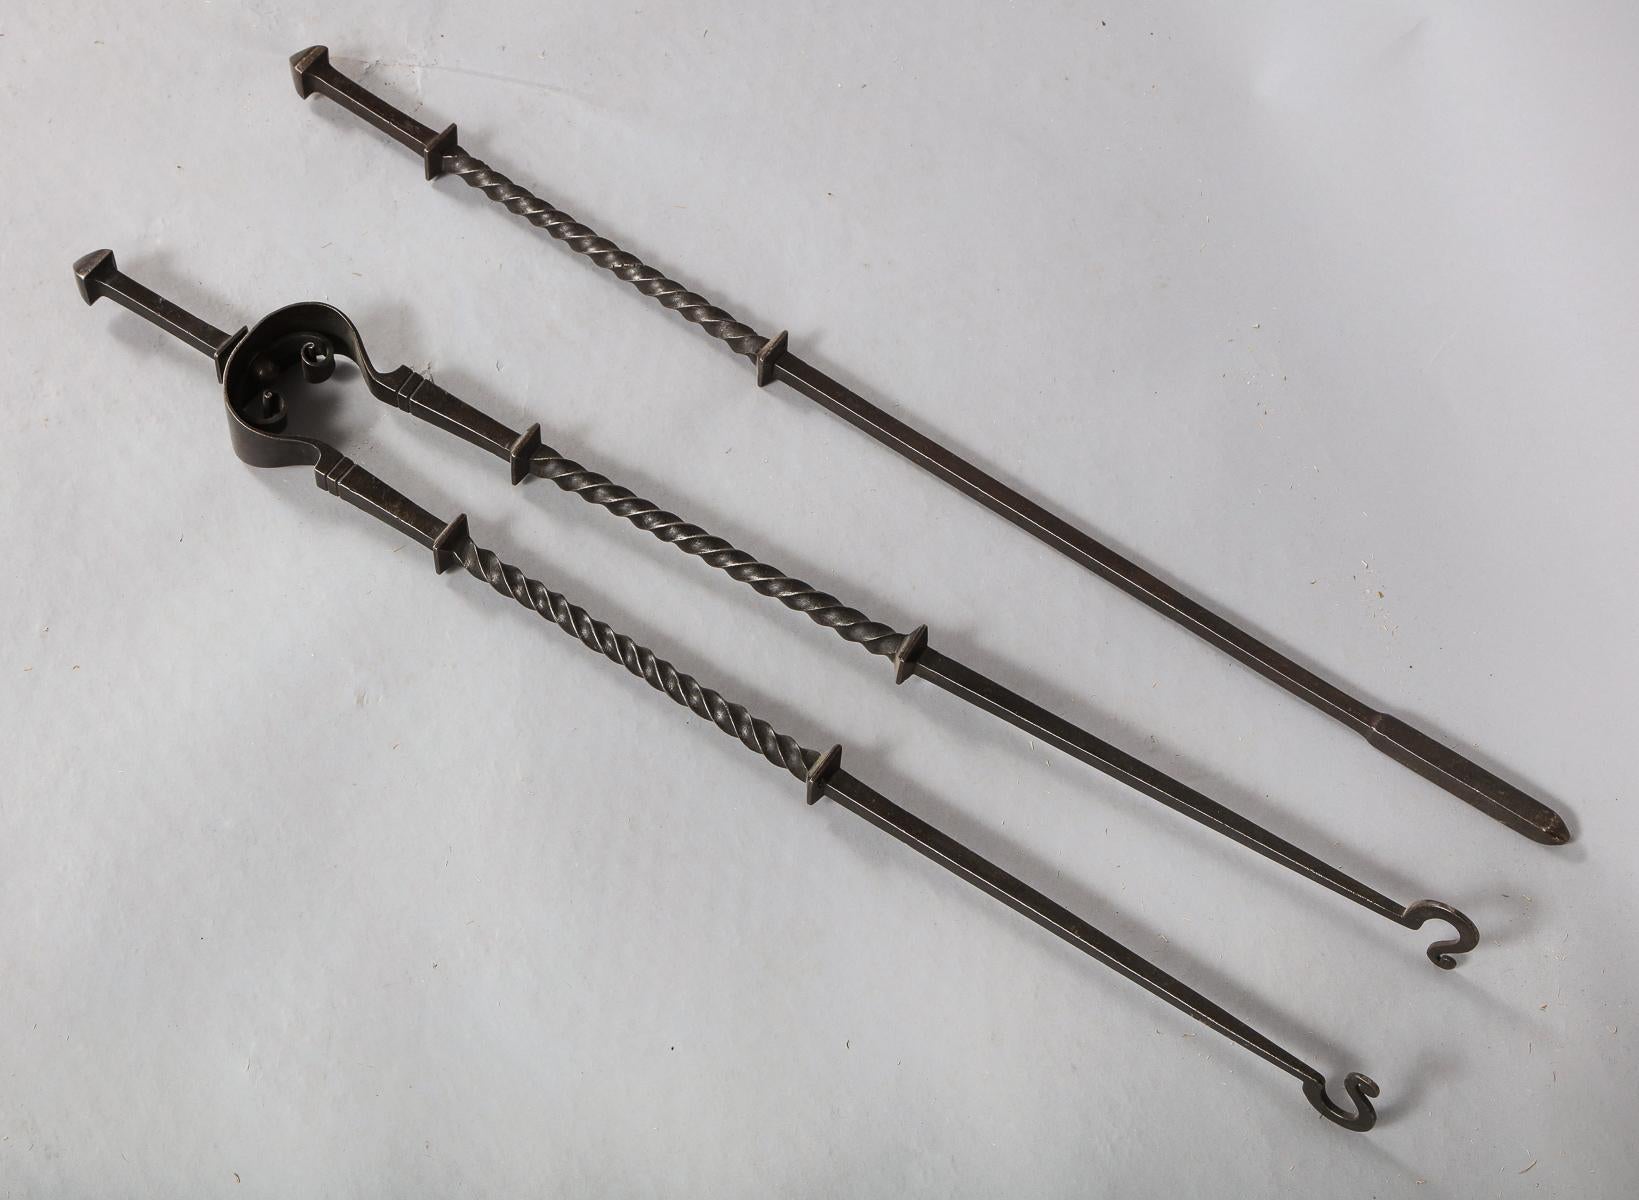 Pine pair of Arts & Crafts period patinated steel fire tools, having square pointed handles over twisted shafts between two square collars, having good, substantial scale.